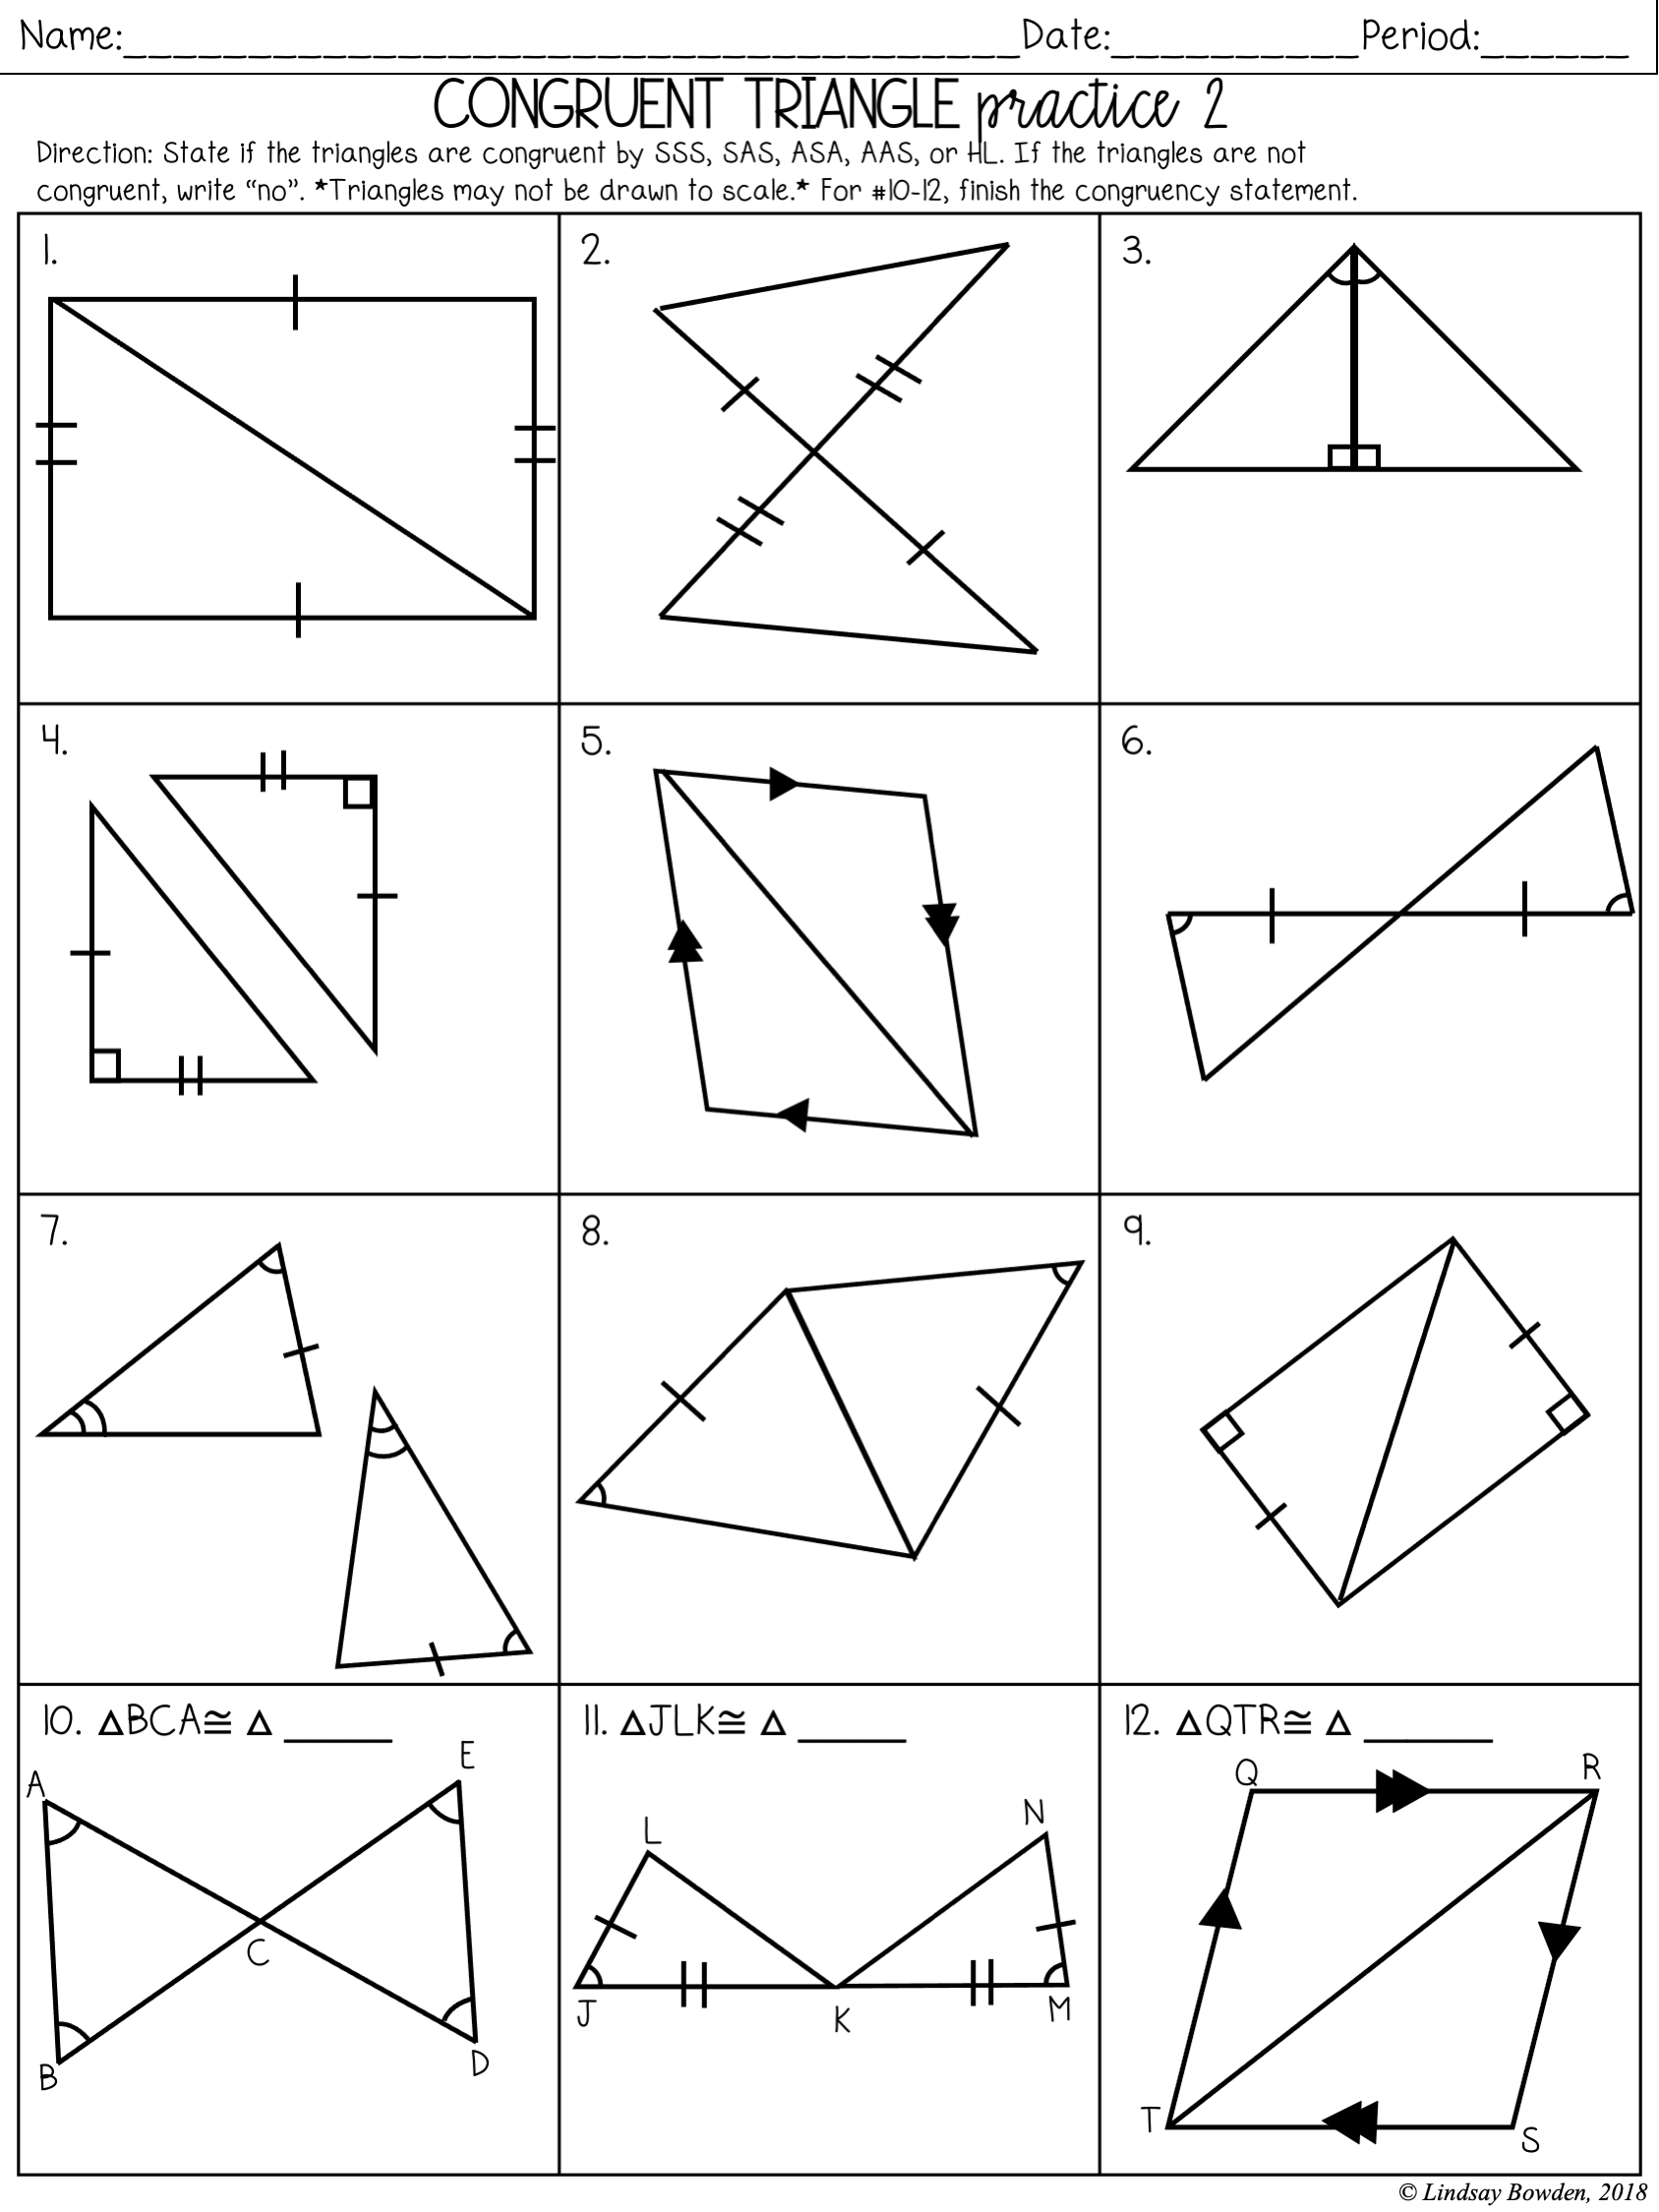 Congruent Triangles Notes and Worksheets - Lindsay Bowden Throughout Triangle Congruence Practice Worksheet